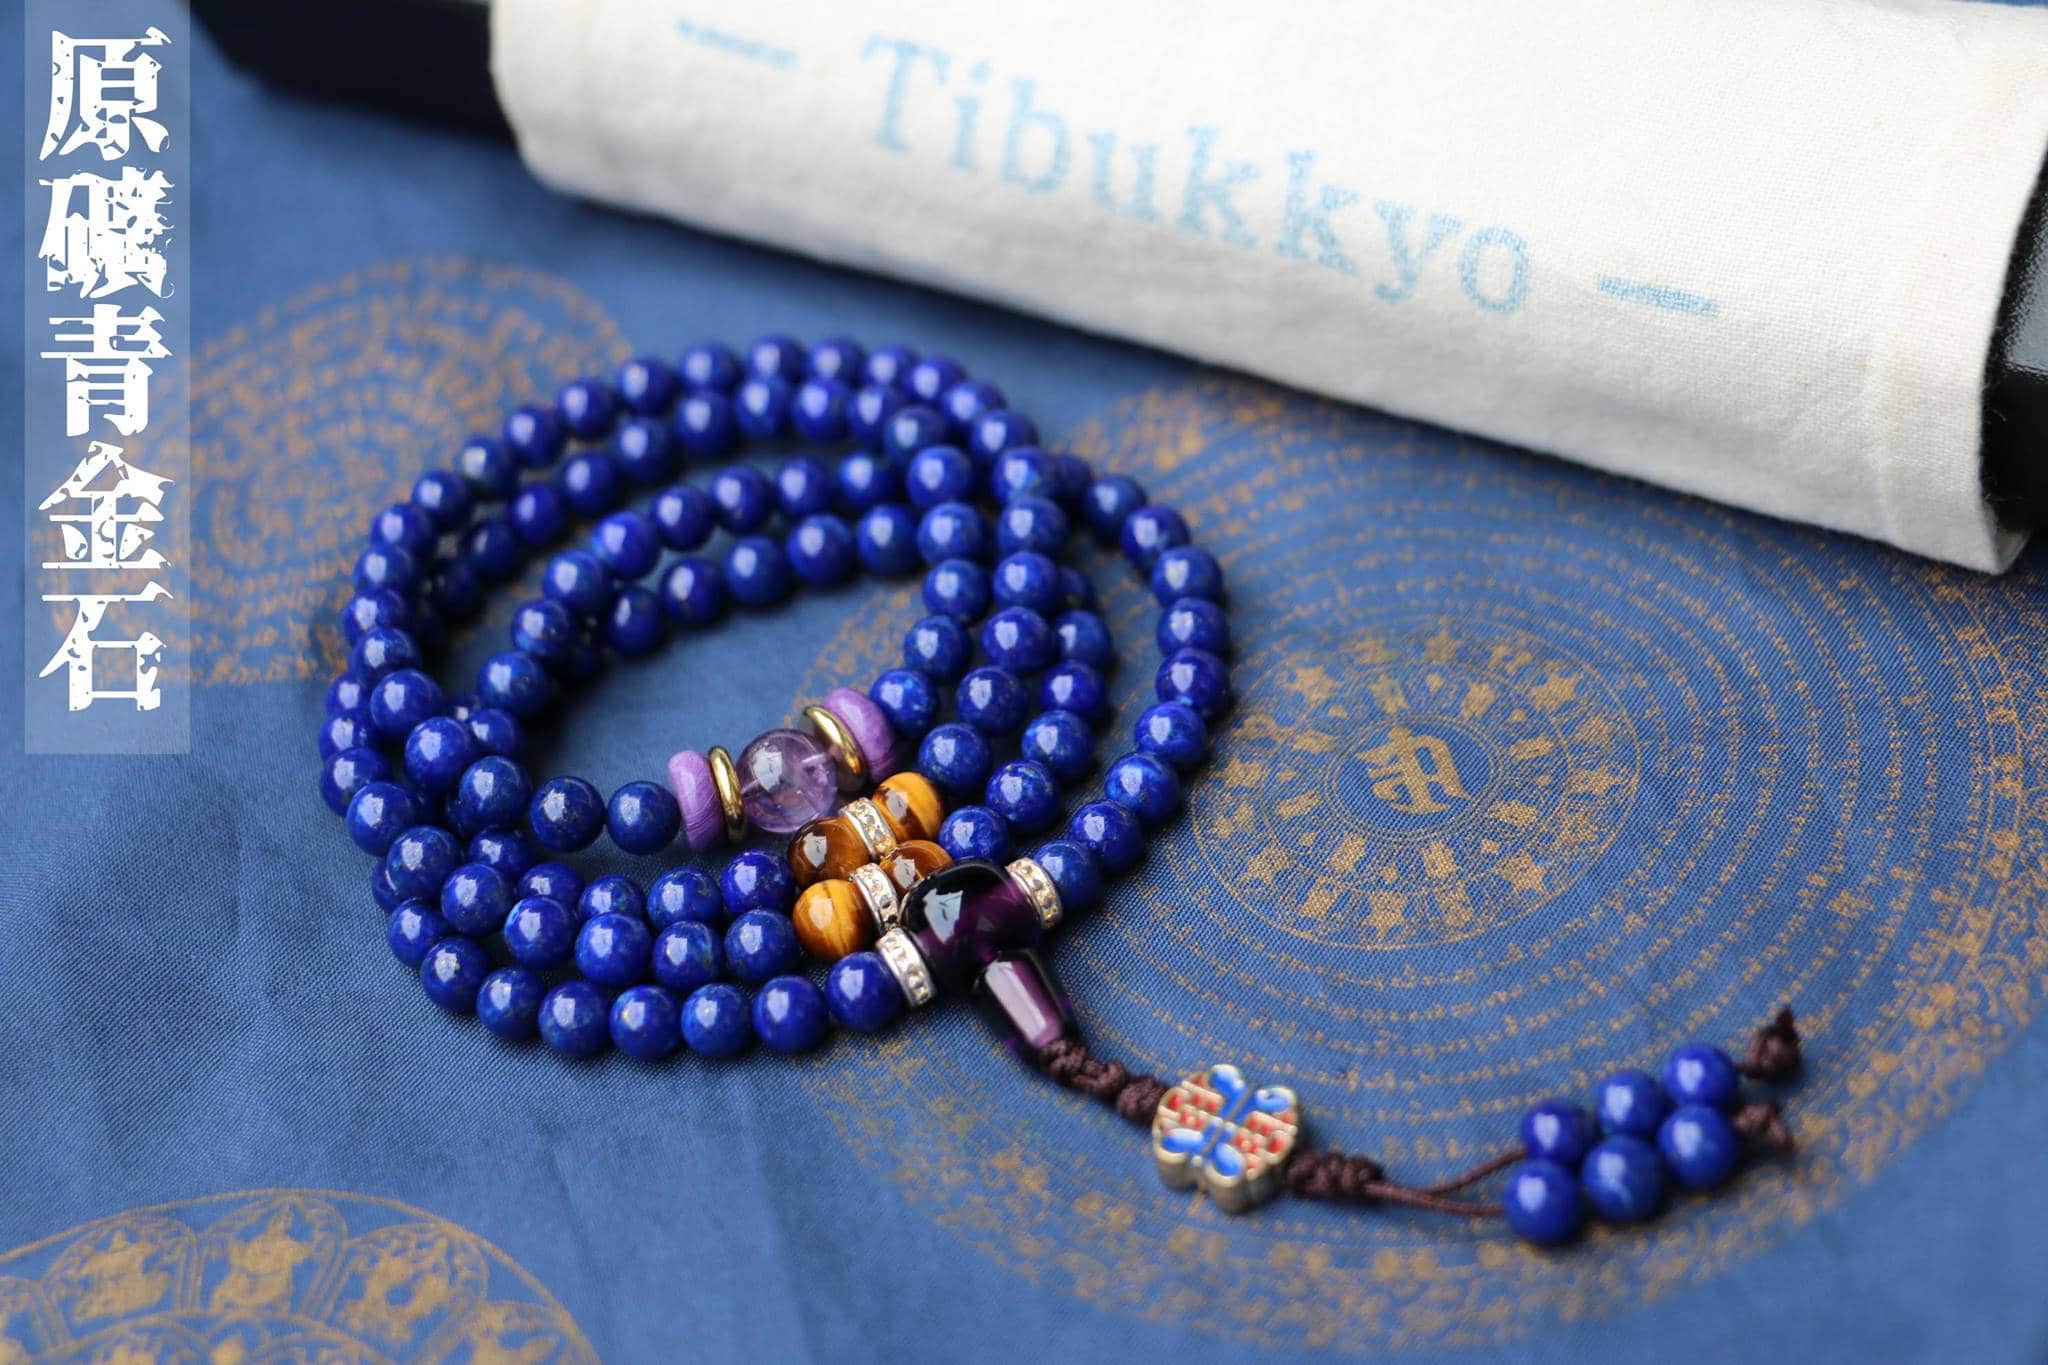 Taiwan Derong Collection｜108 undyed lapis lazuli 6mm round beads in raw ore｜Less gold and less white boutique lapis lazuli｜Amethyst beads